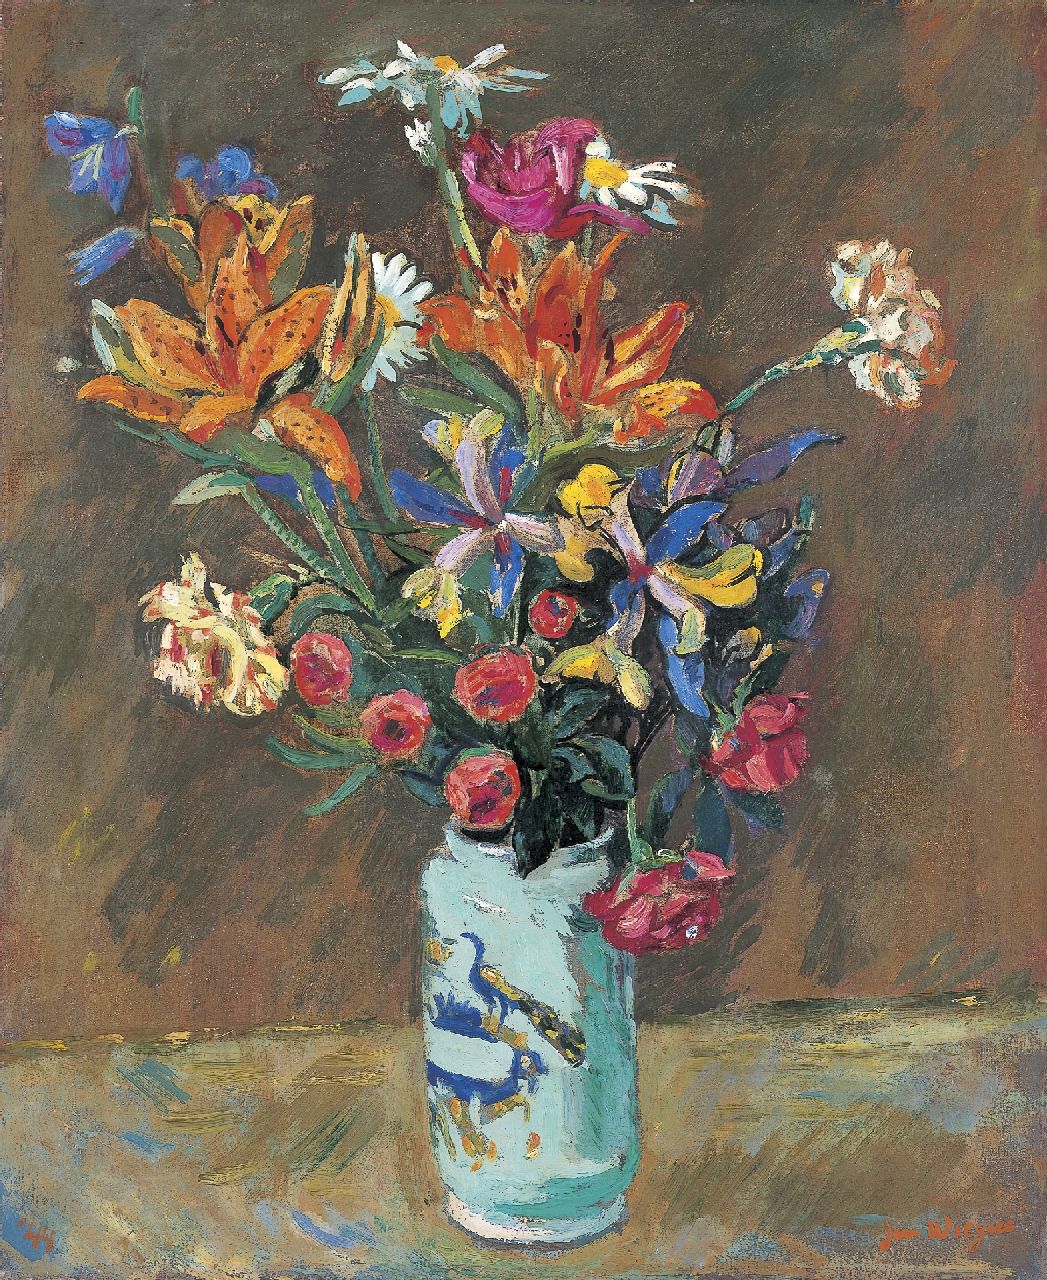 Wiegers J.  | Jan Wiegers, A bunch of wildflowers, oil on canvas 61.3 x 50.6 cm, signed l.r. and dated '44